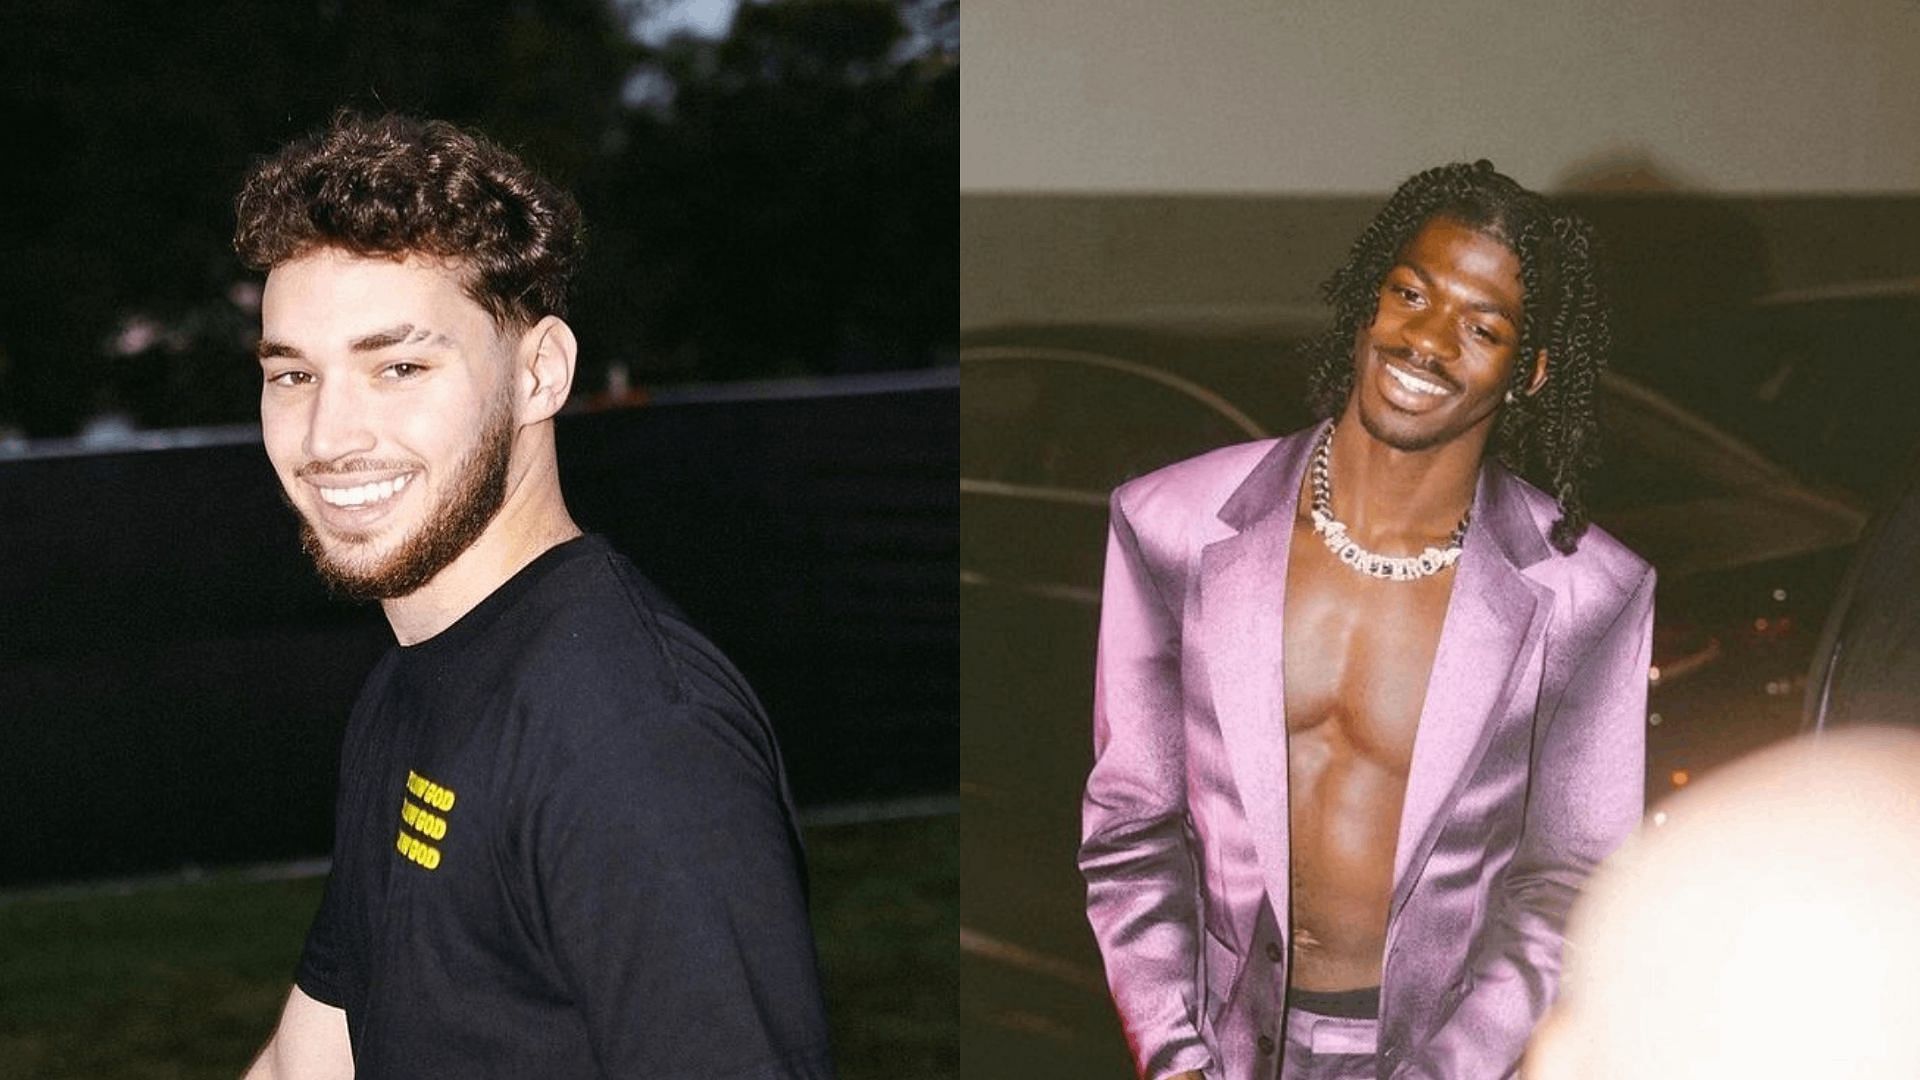 Adin Ross criticized Lil Nas X in his recent video. (Image via adinross and nasxroad/Instagram)